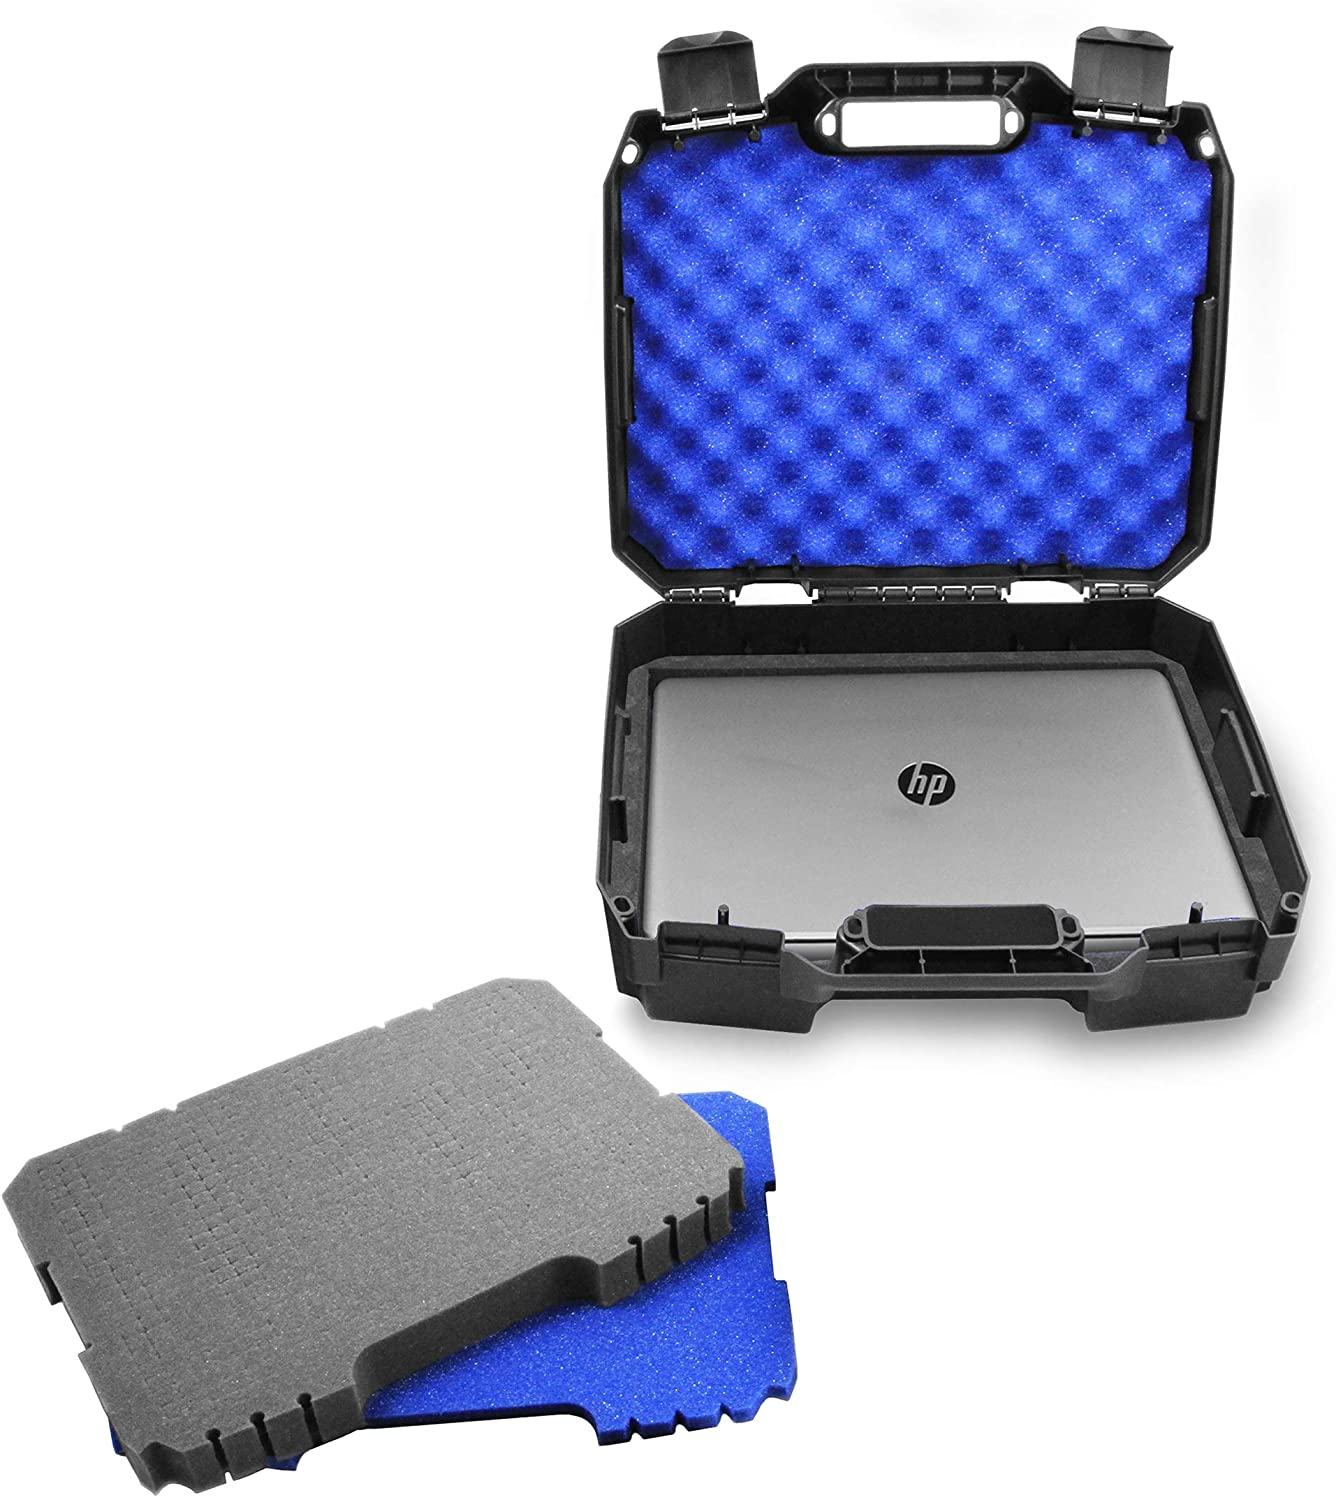 CASEMATIX Laptop Hard Case for 15.6" Laptops with Customizable Foam Compatible with HP Elite Dragonfly, Envy 360 X360, Stream 14 | Lightweight & Affordable Hard Cases For Microphones, Guns, PS5s More